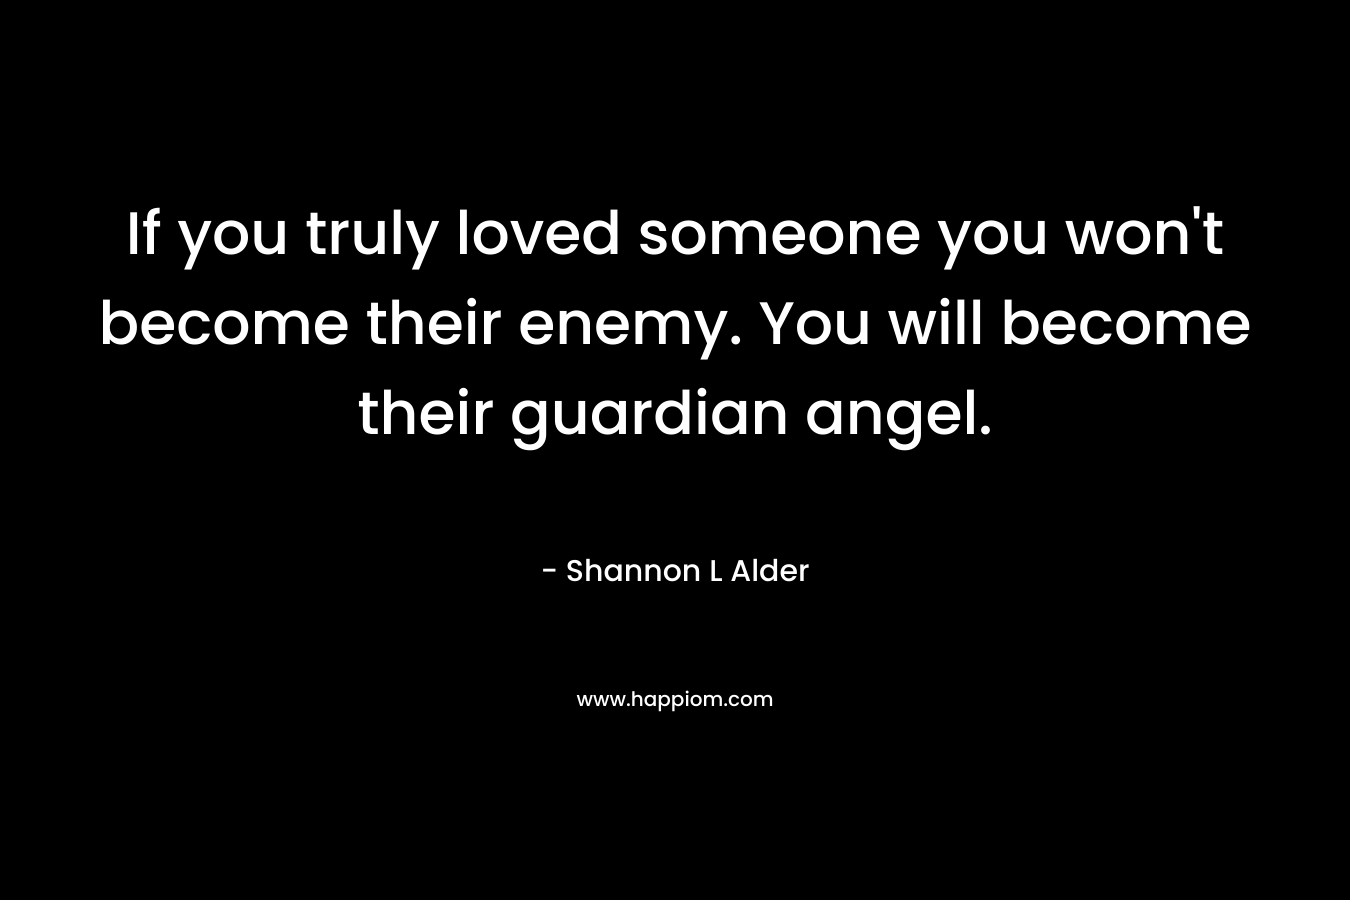 If you truly loved someone you won't become their enemy. You will become their guardian angel.